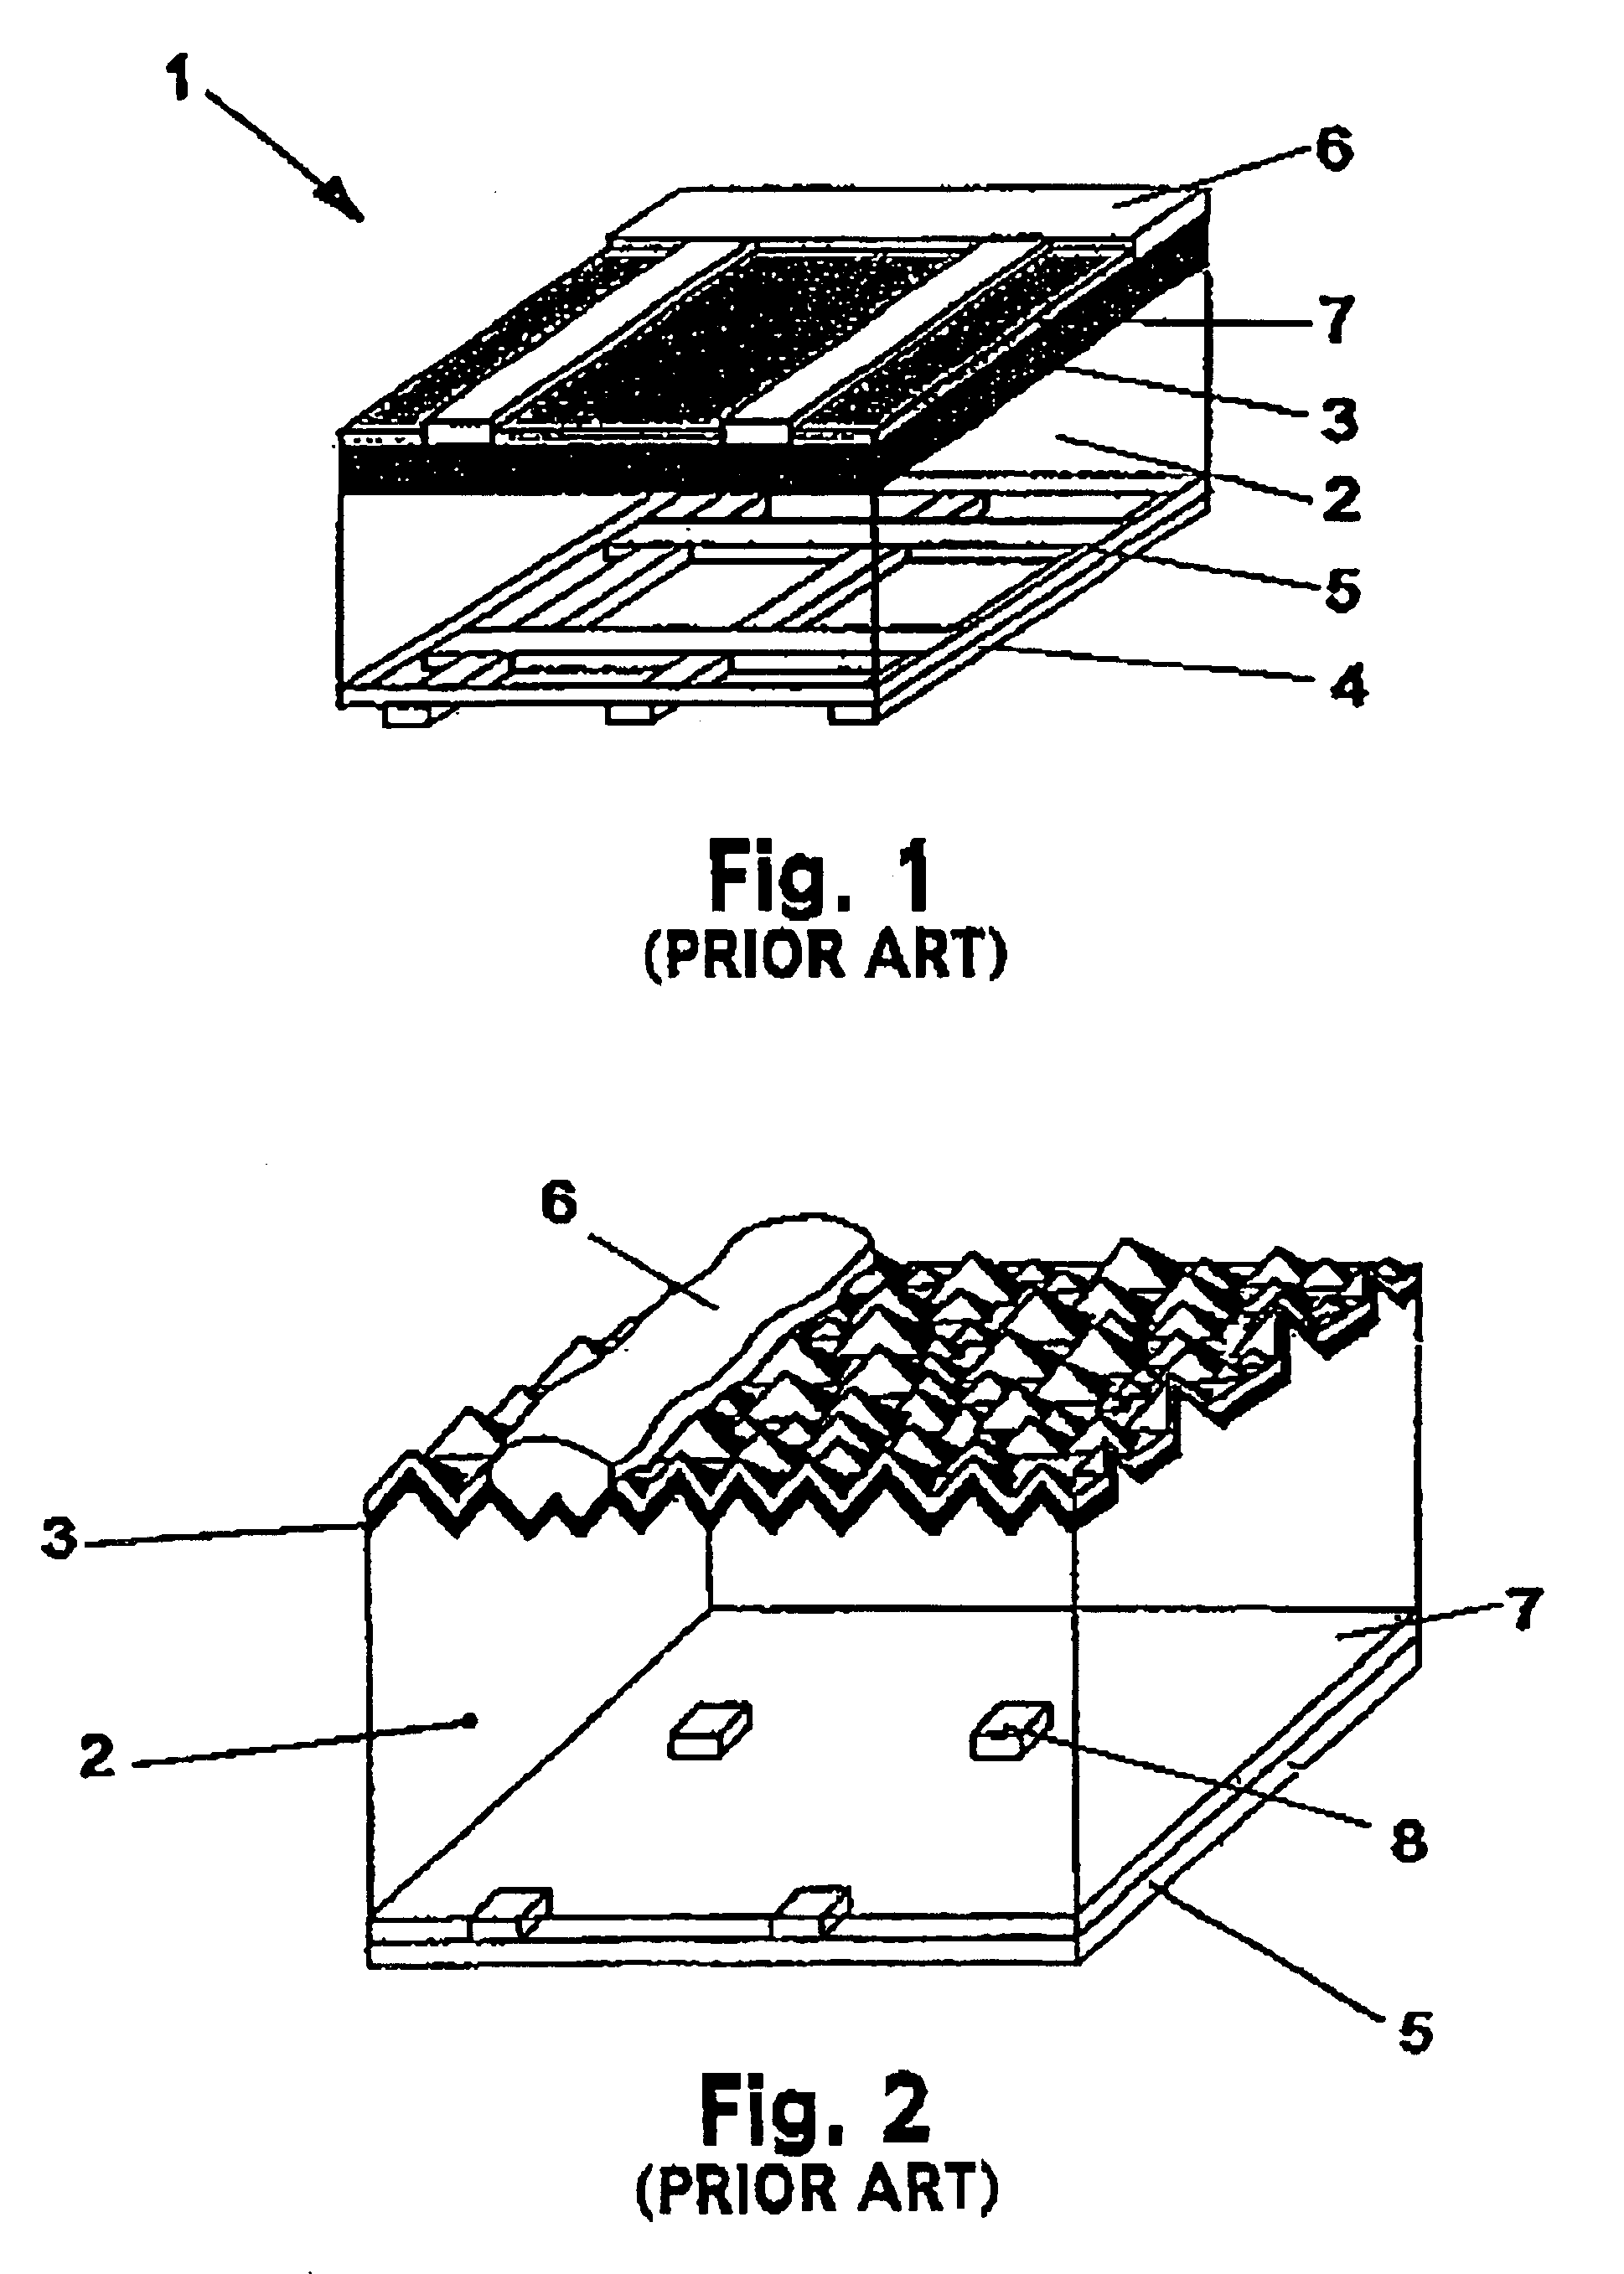 Method of producing a semiconductor-metal contact through a dielectric layer